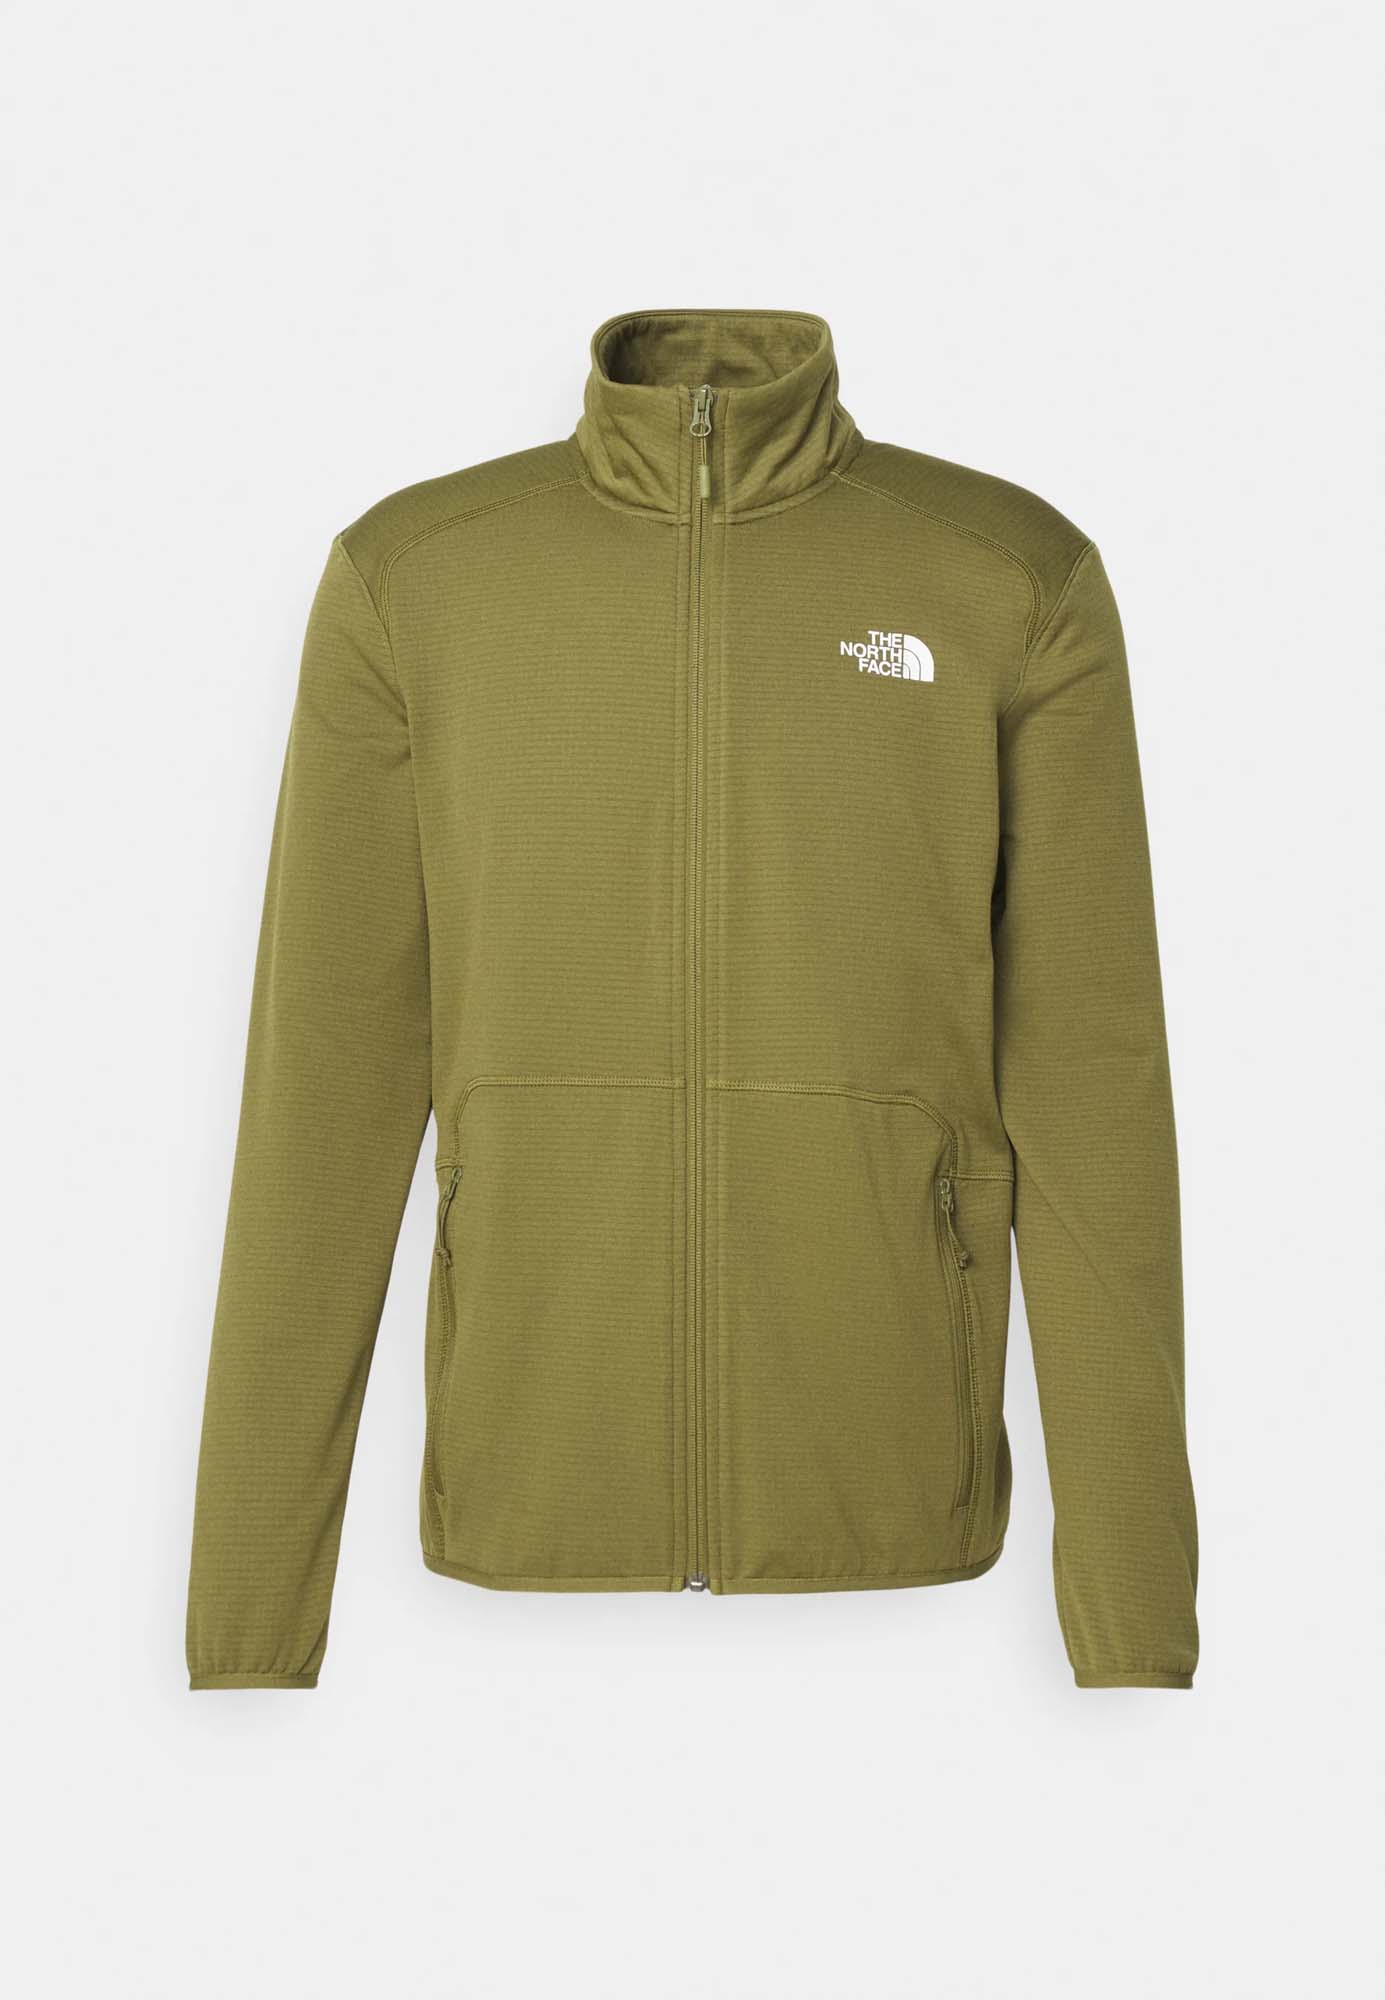 THE NORTH FACE Quest fz jkt